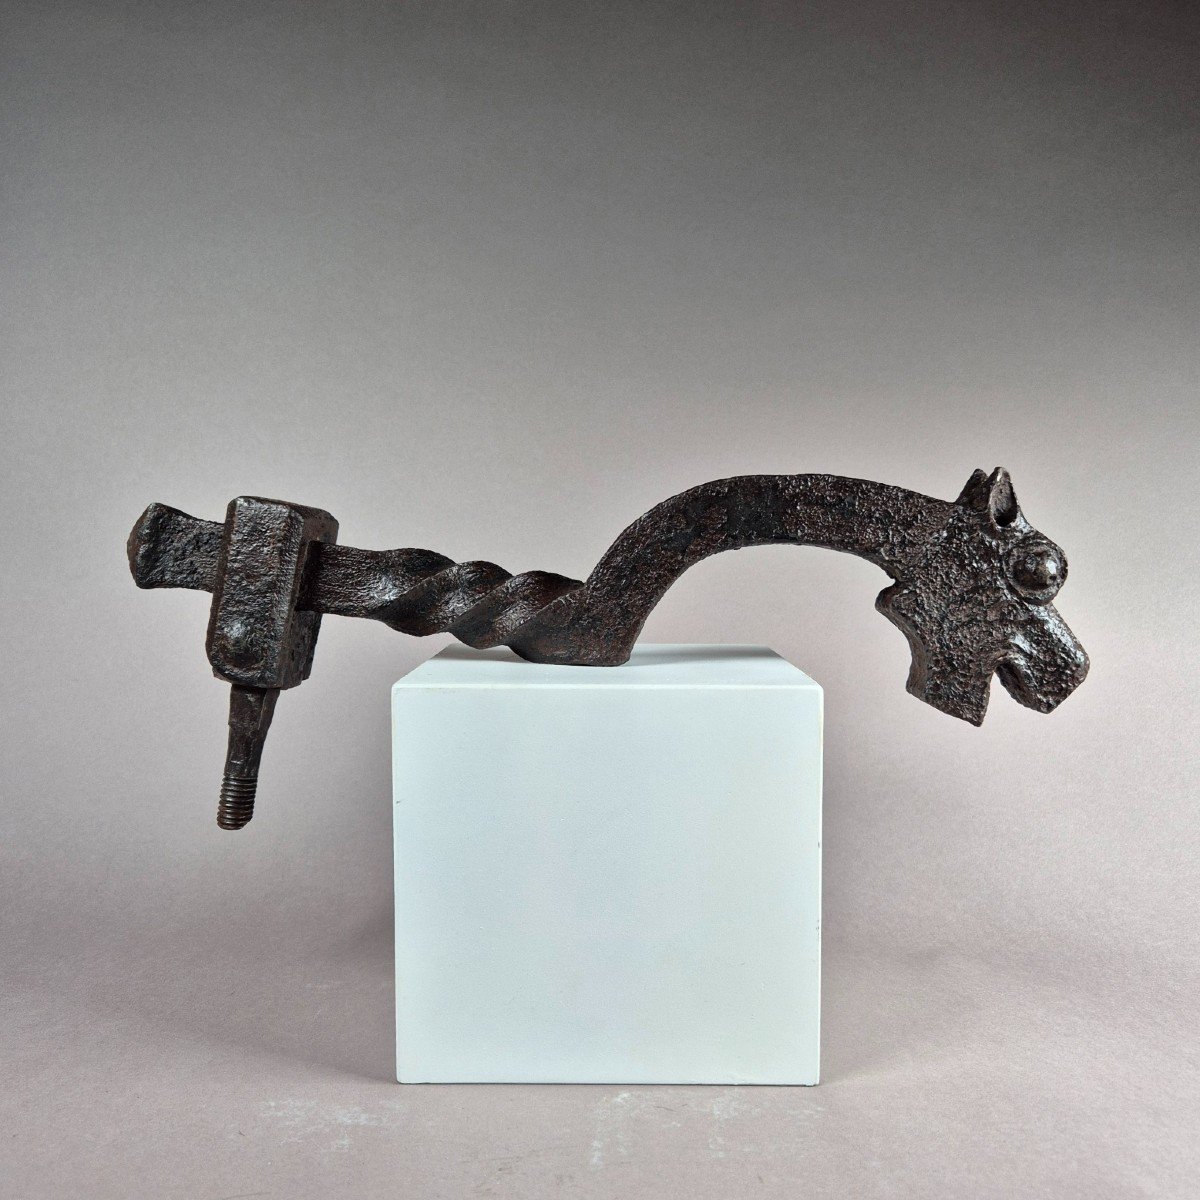 Wrought Iron Door Knocker In The Shape Of A Dragon, 17th Century-photo-7